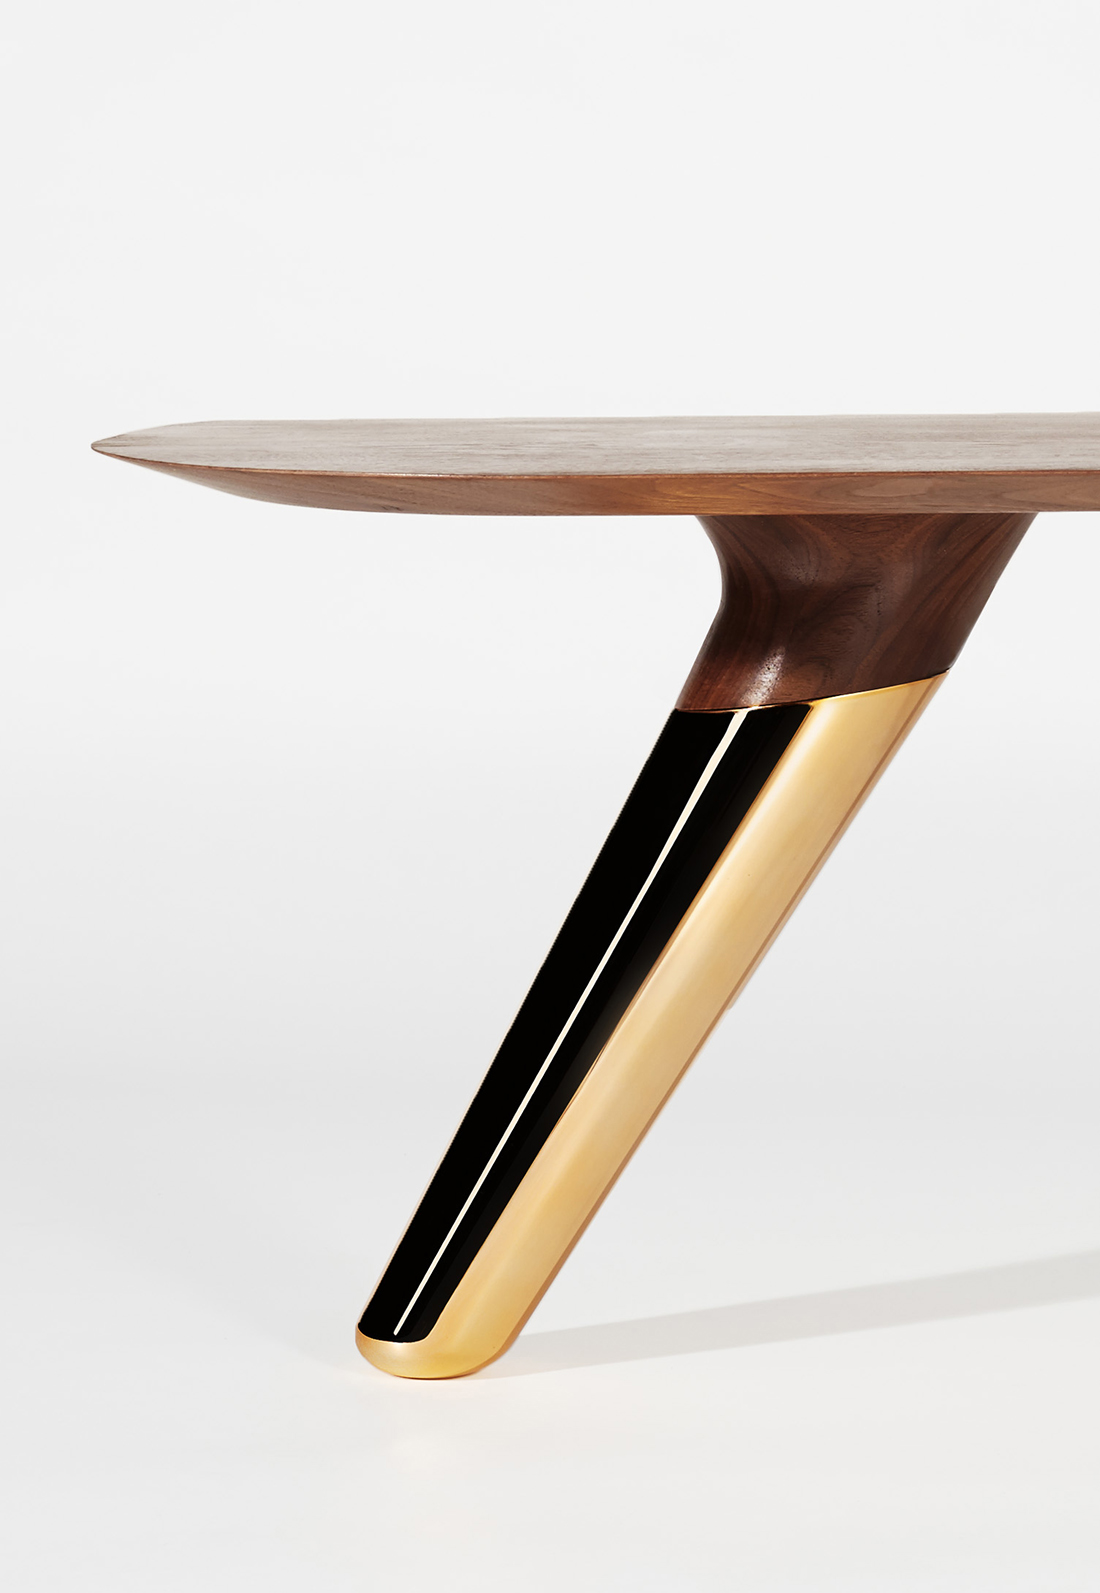  Astfrei CS1 Coffee and Side Table 